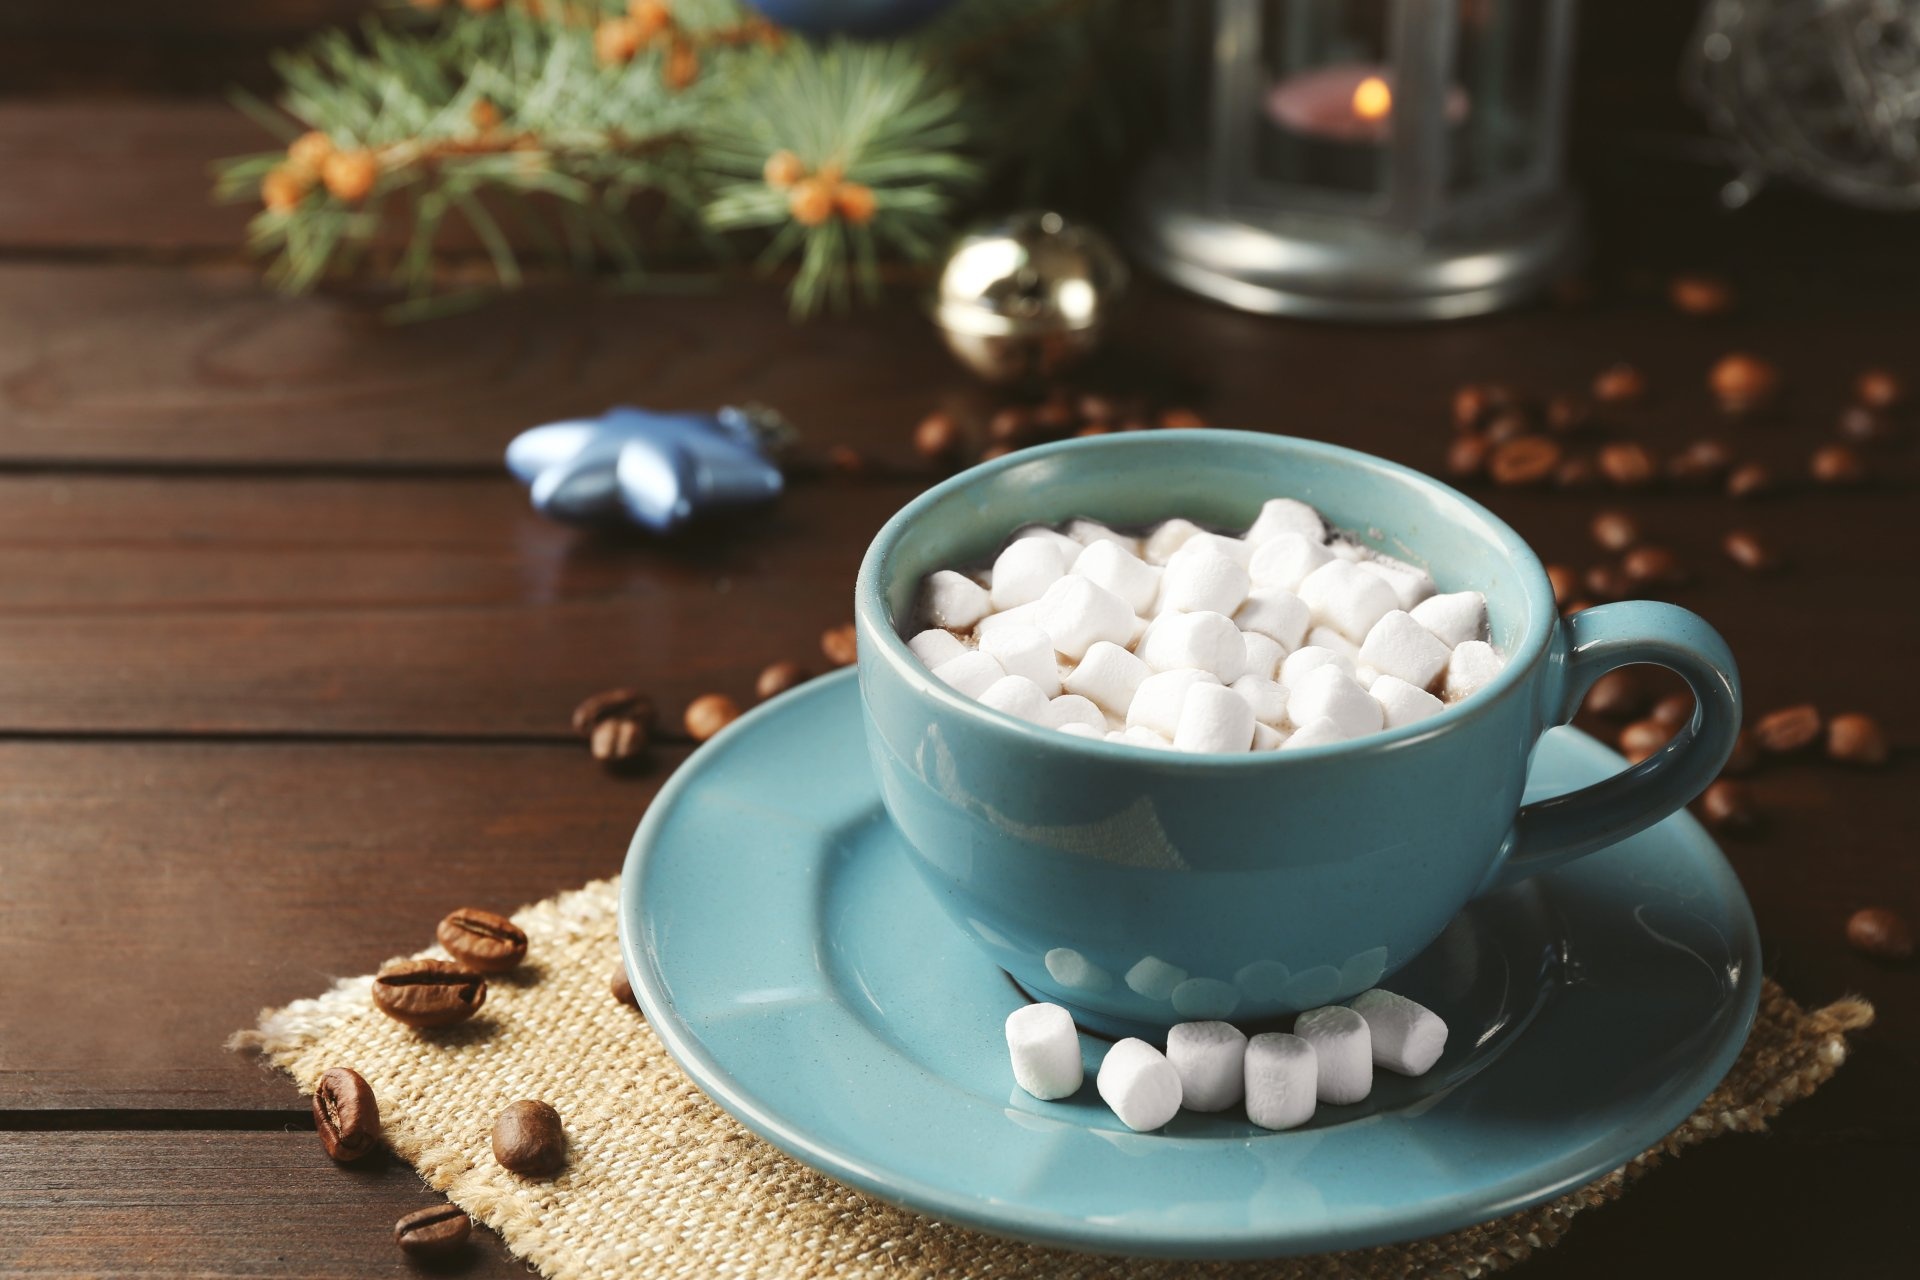 Marshmallow: Pillow-like candies, Added to hot chocolate beverages. 1920x1280 HD Wallpaper.